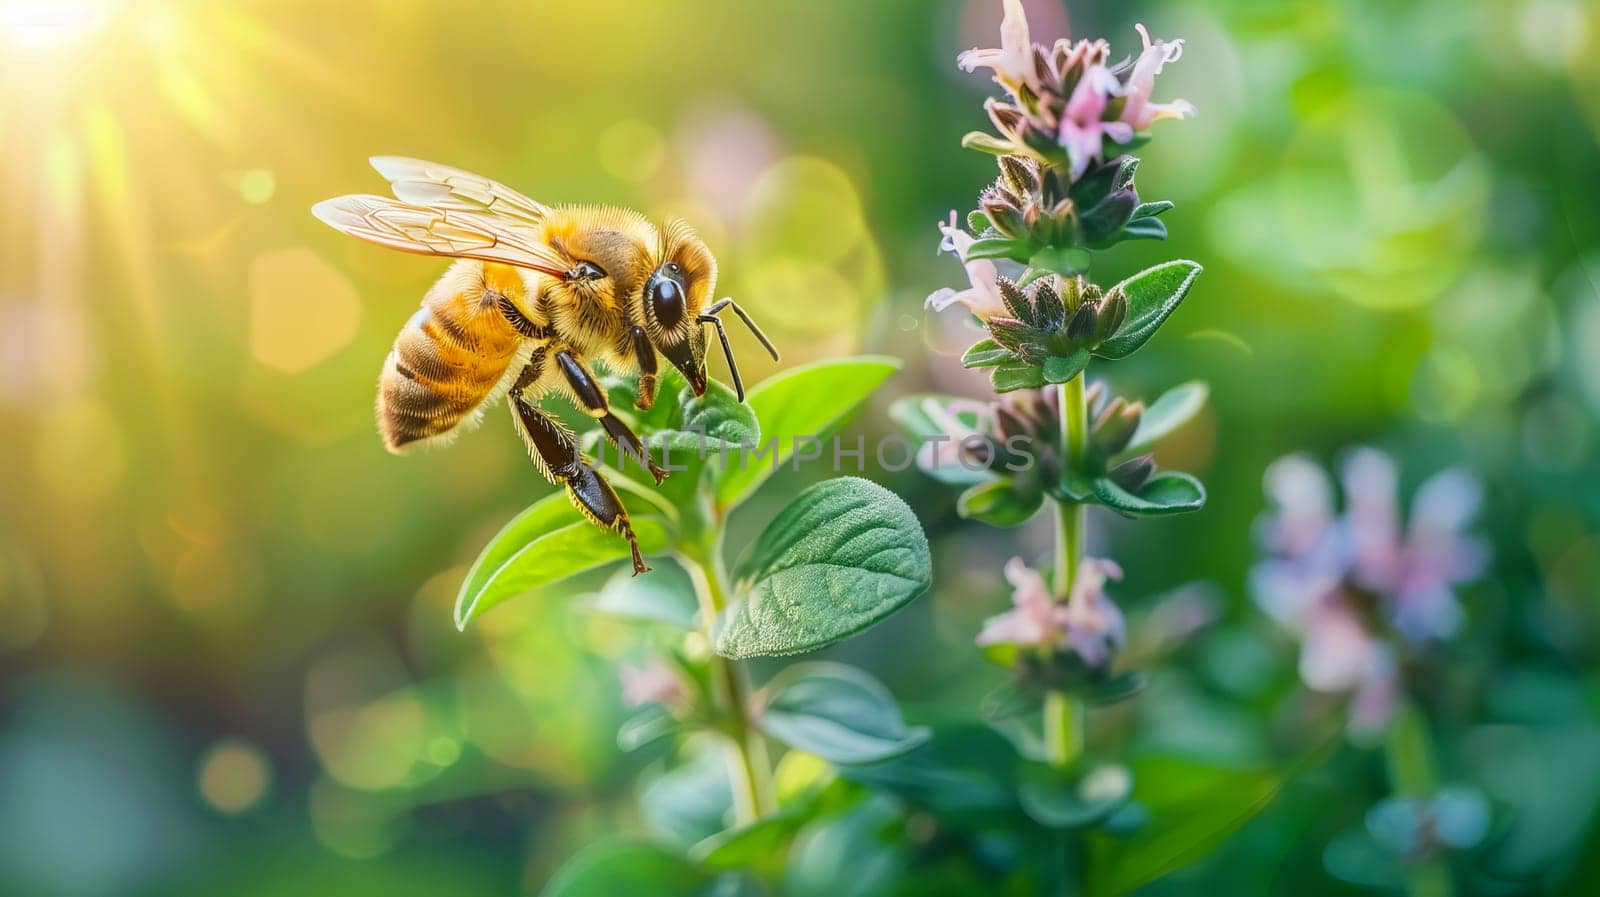 A honey bee collects nectar from oregano flowers in a garden in summer.